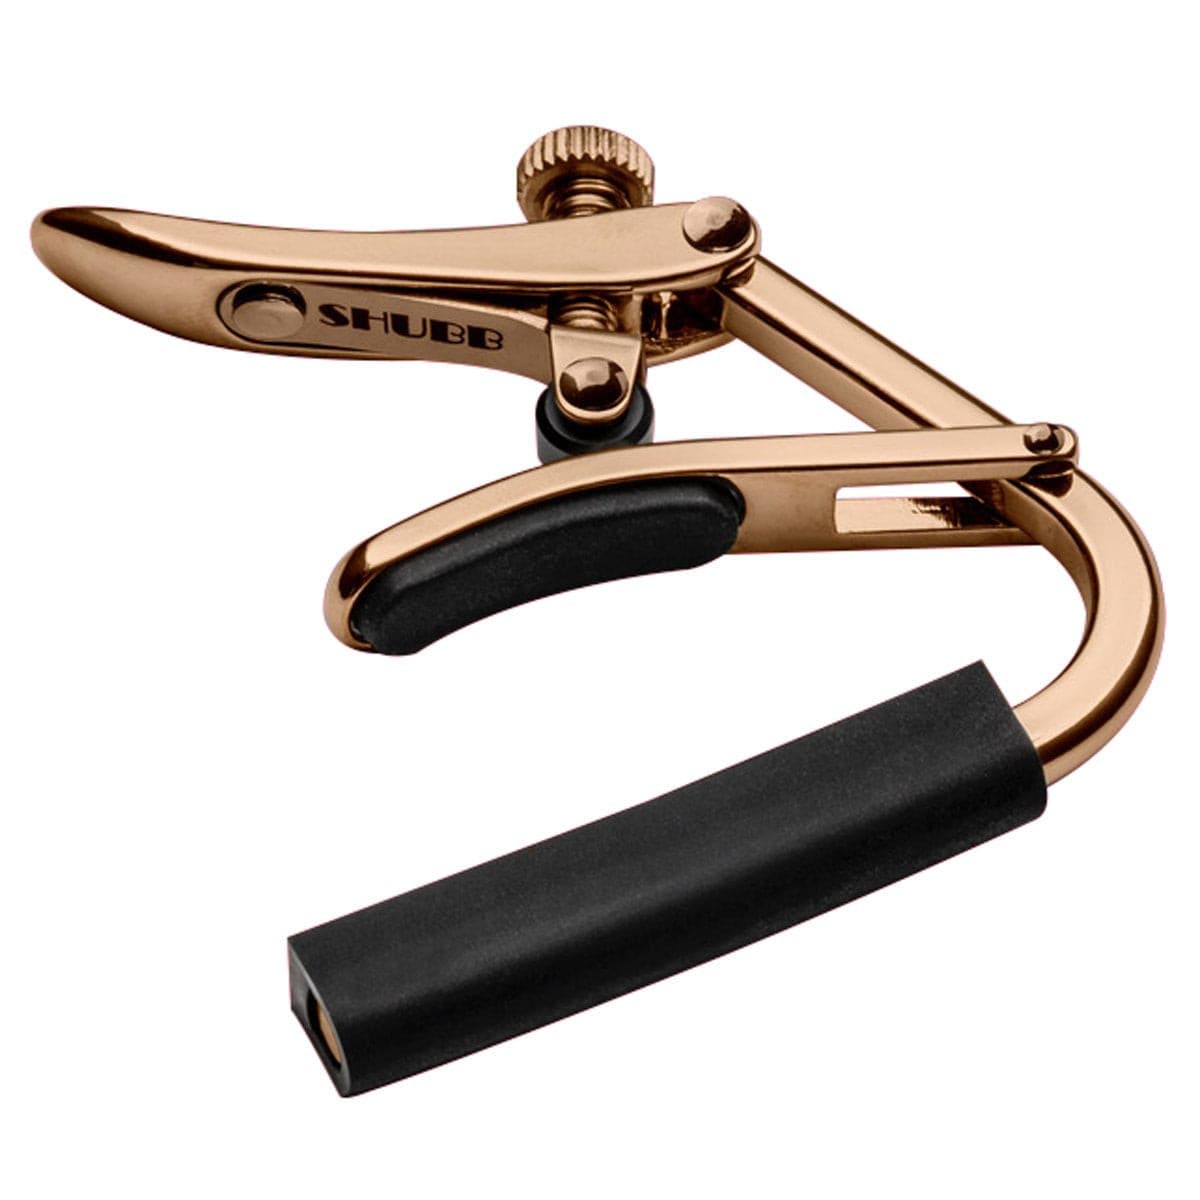 Shubb 'Capo Royale' Nylon String Guitar Capo - Rose Gold, Accessory for sale at Richards Guitars.